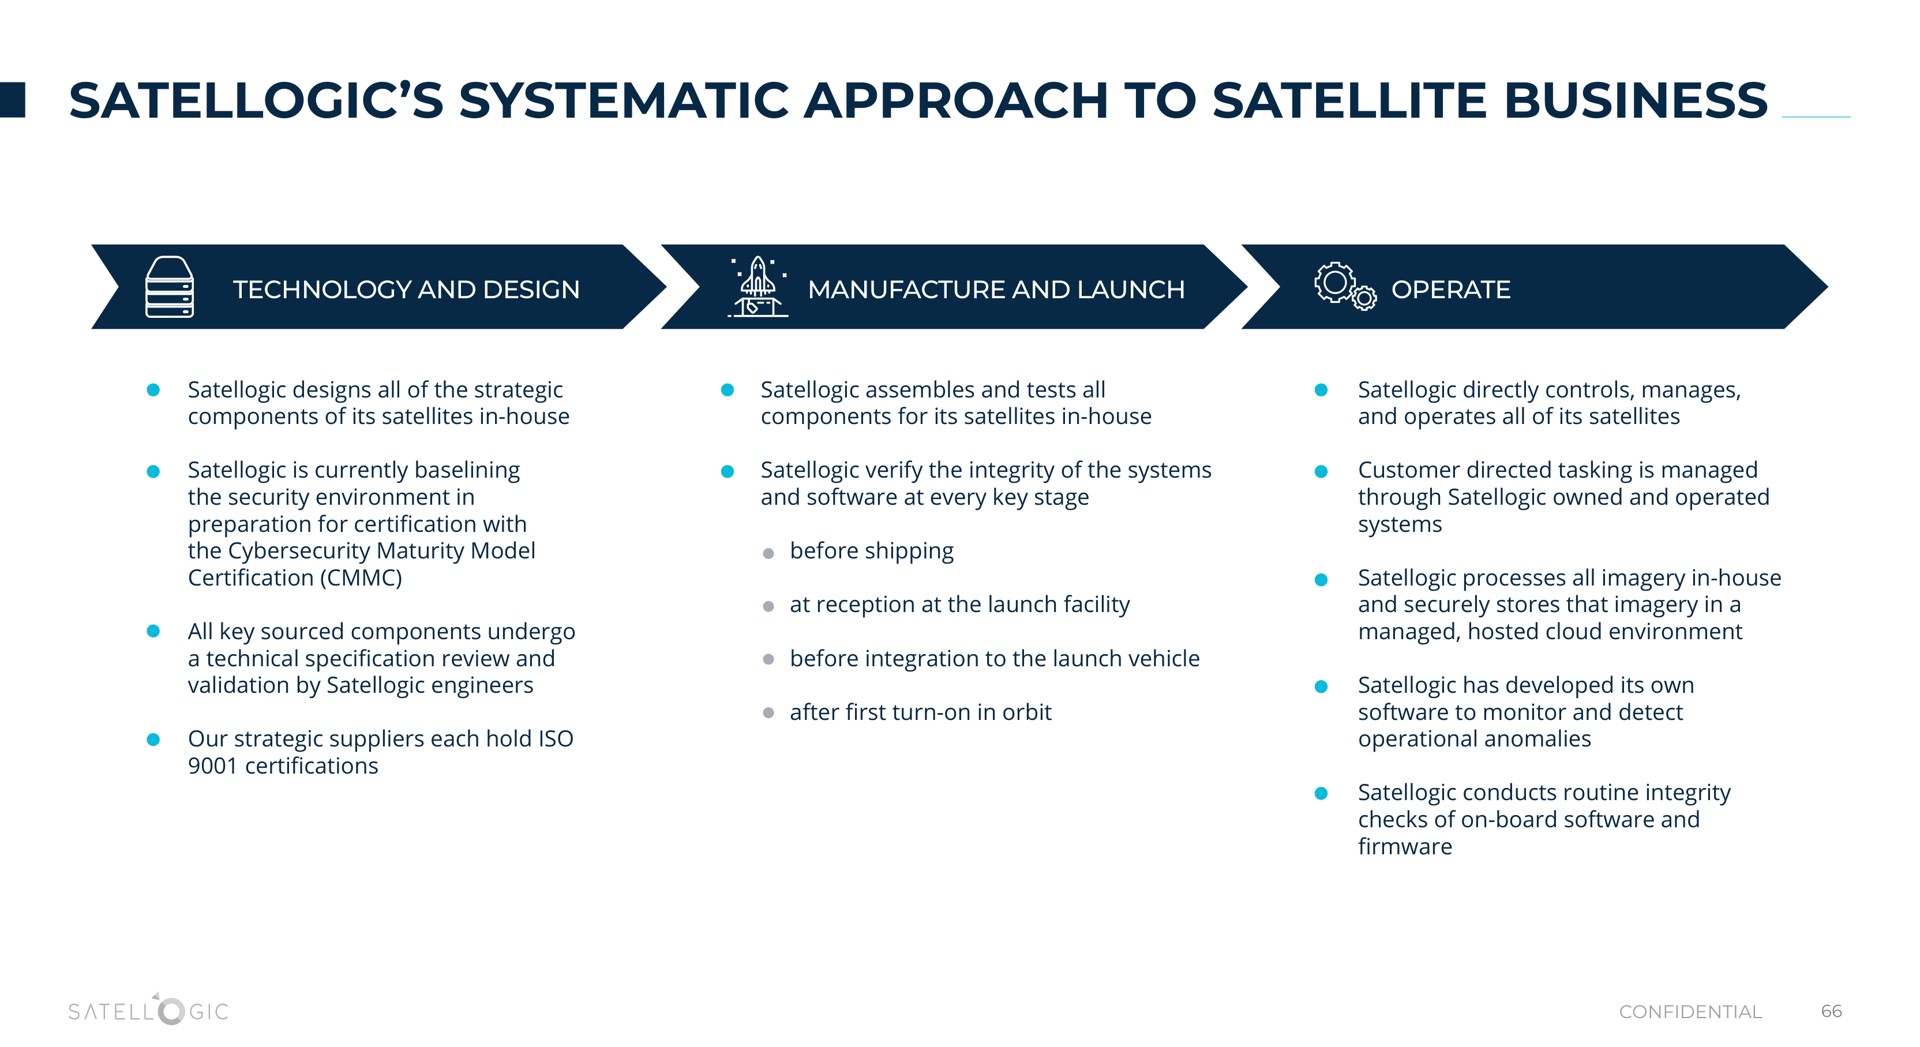 systematic approach to satellite business | Satellogic